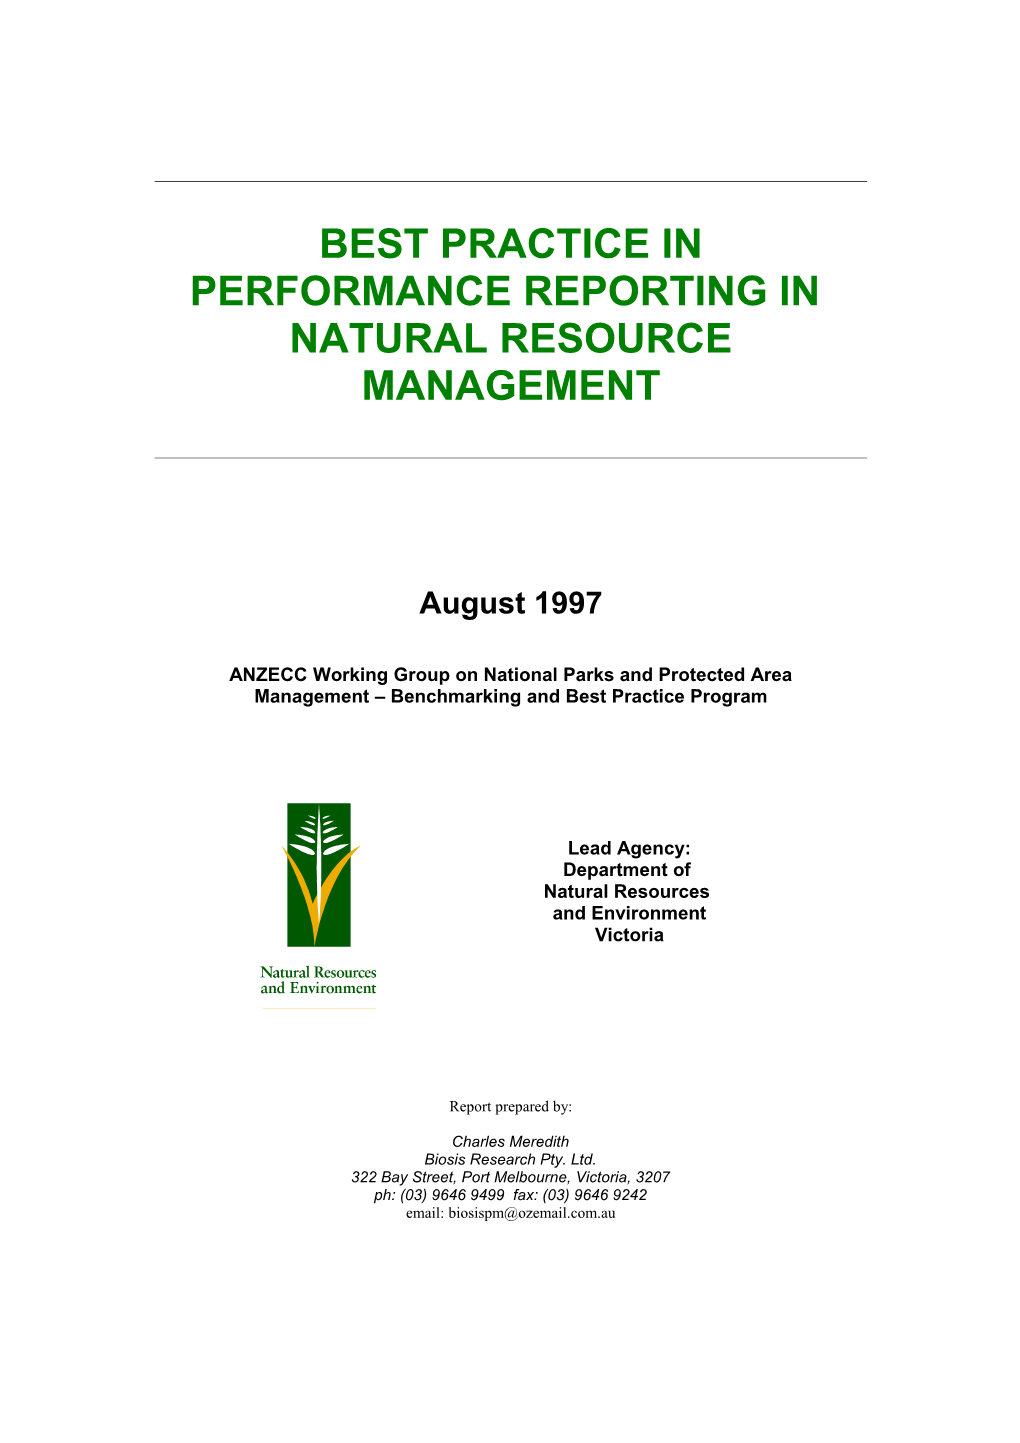 Best Practice in Performance Reporting